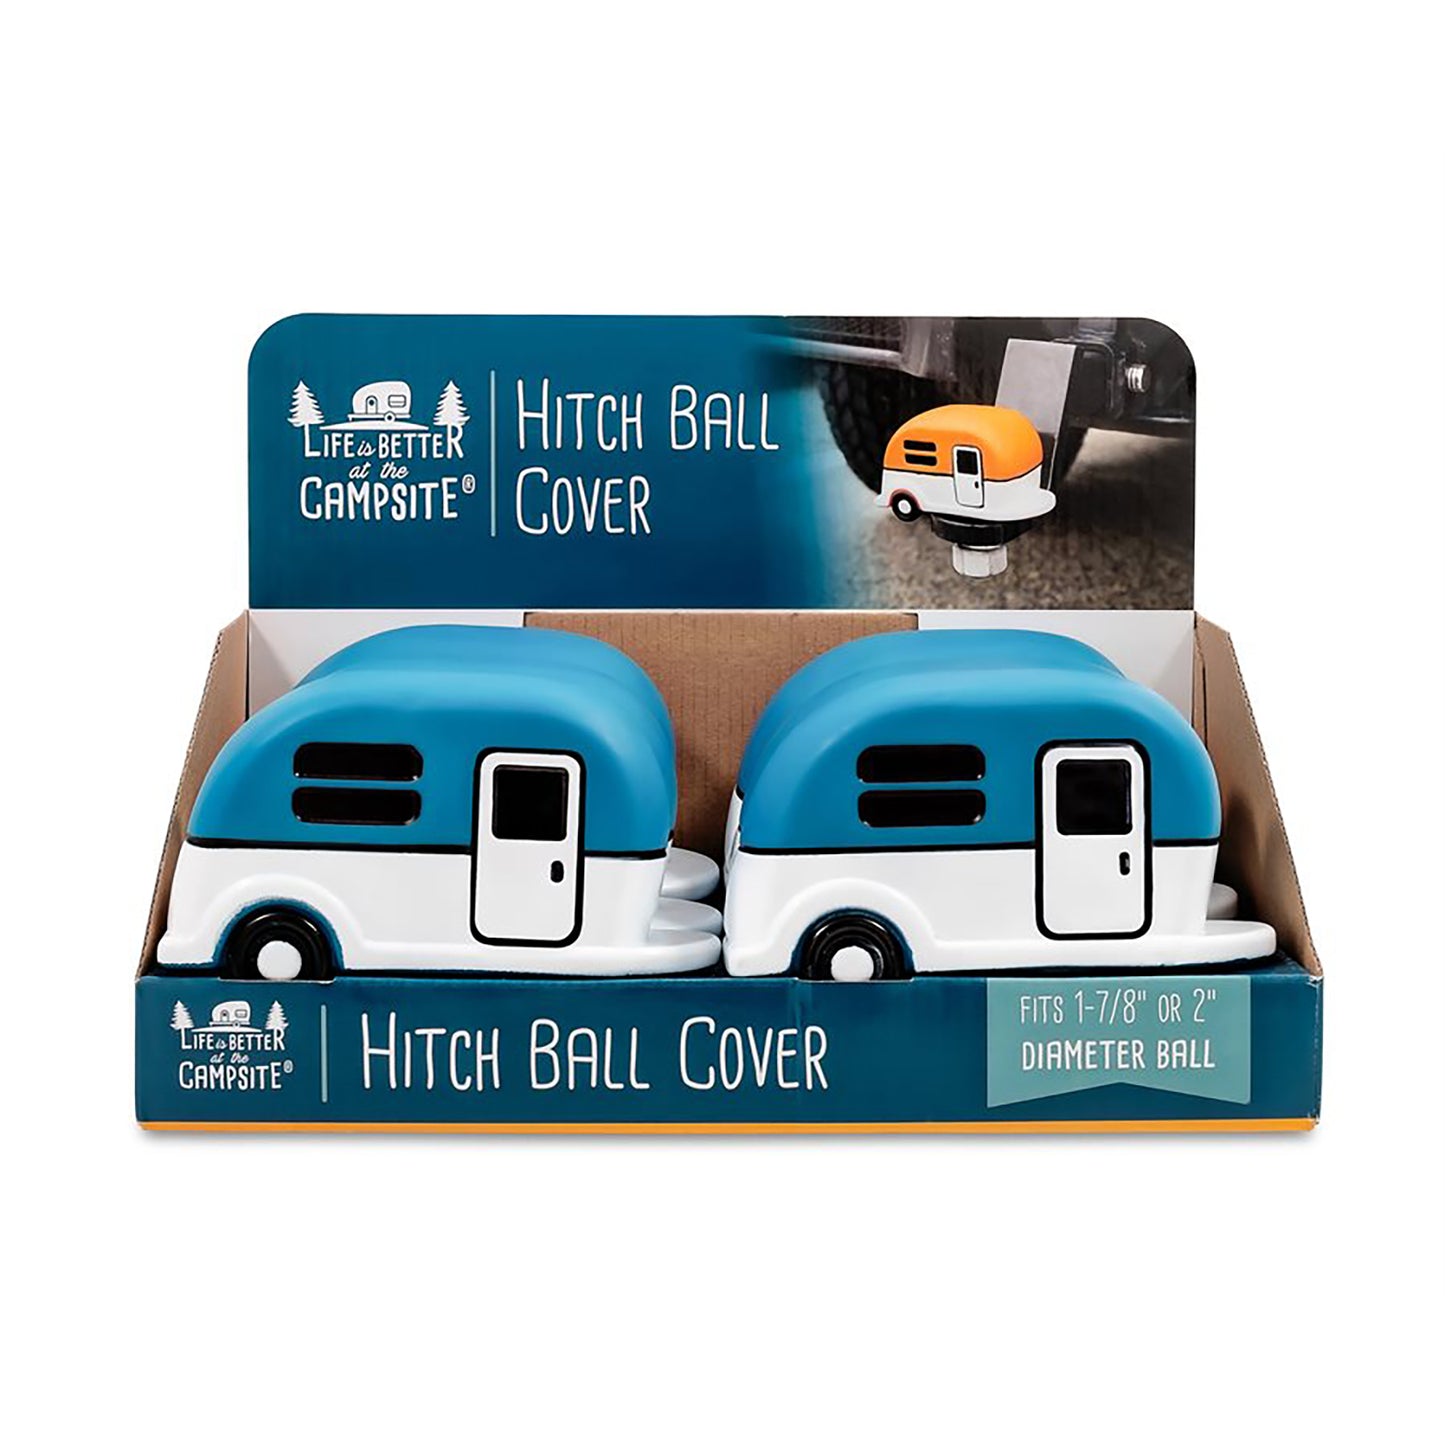 HITCH BALL COVER